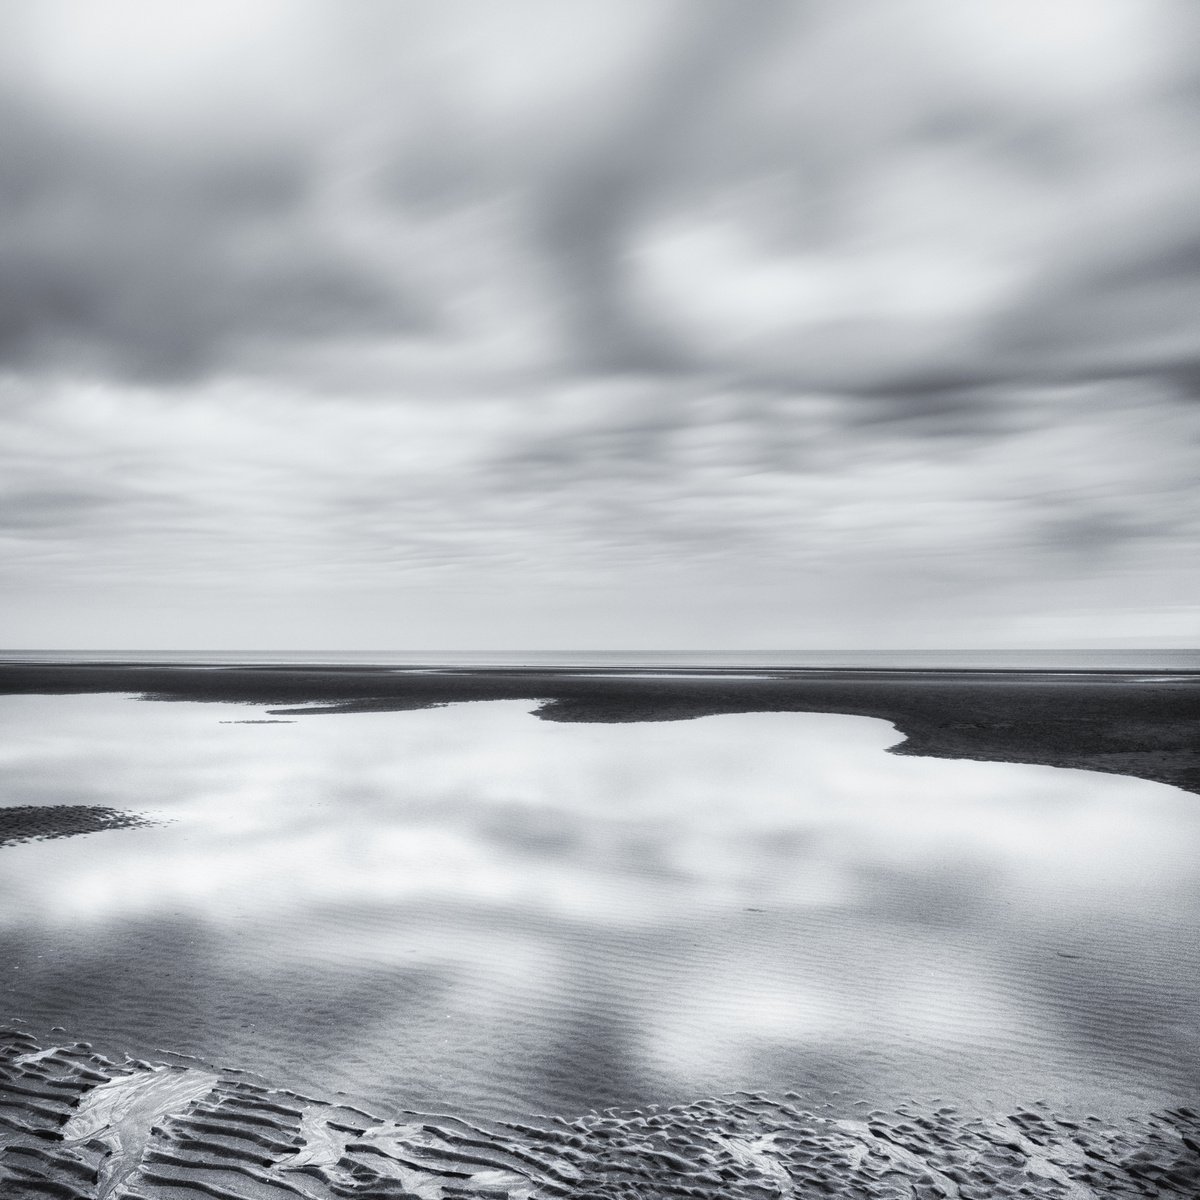 Low tide and reflected clouds by Karim Carella